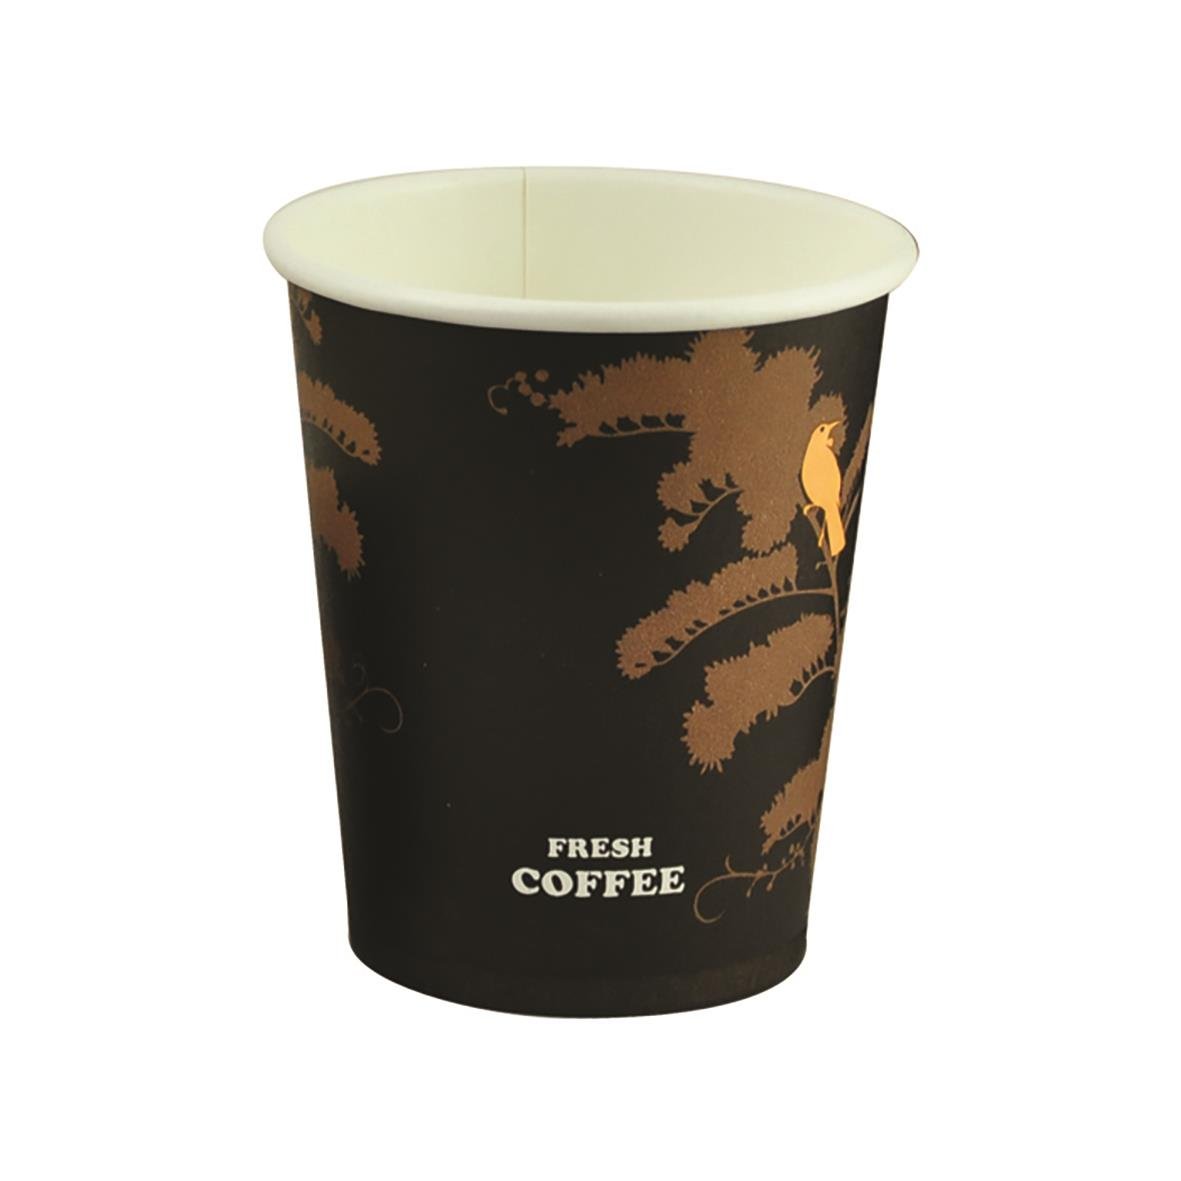 Pappersmugg Fresh Coffee Brun 24cl 61020006